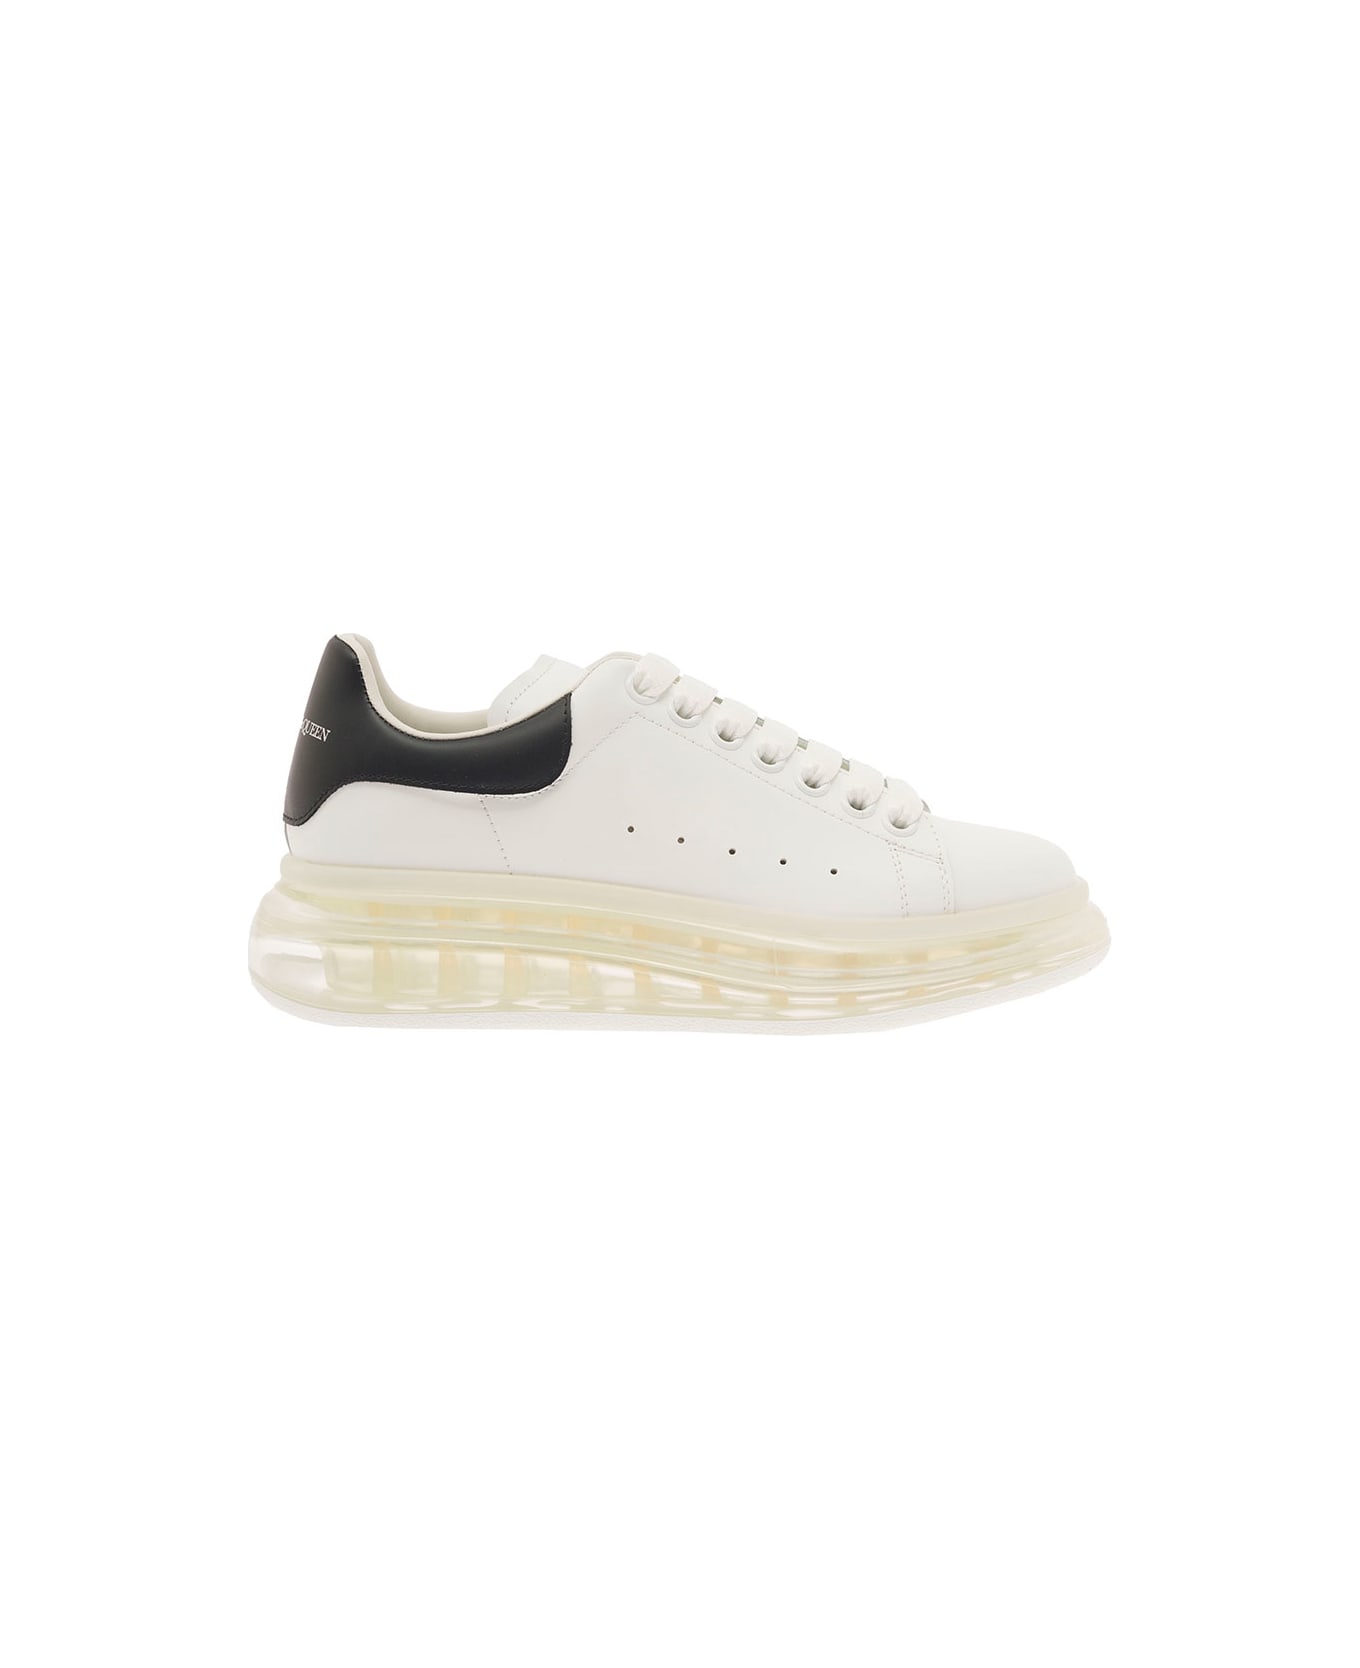 Alexander McQueen Transaparent Big Sole White Sneakers In Leather Man - White